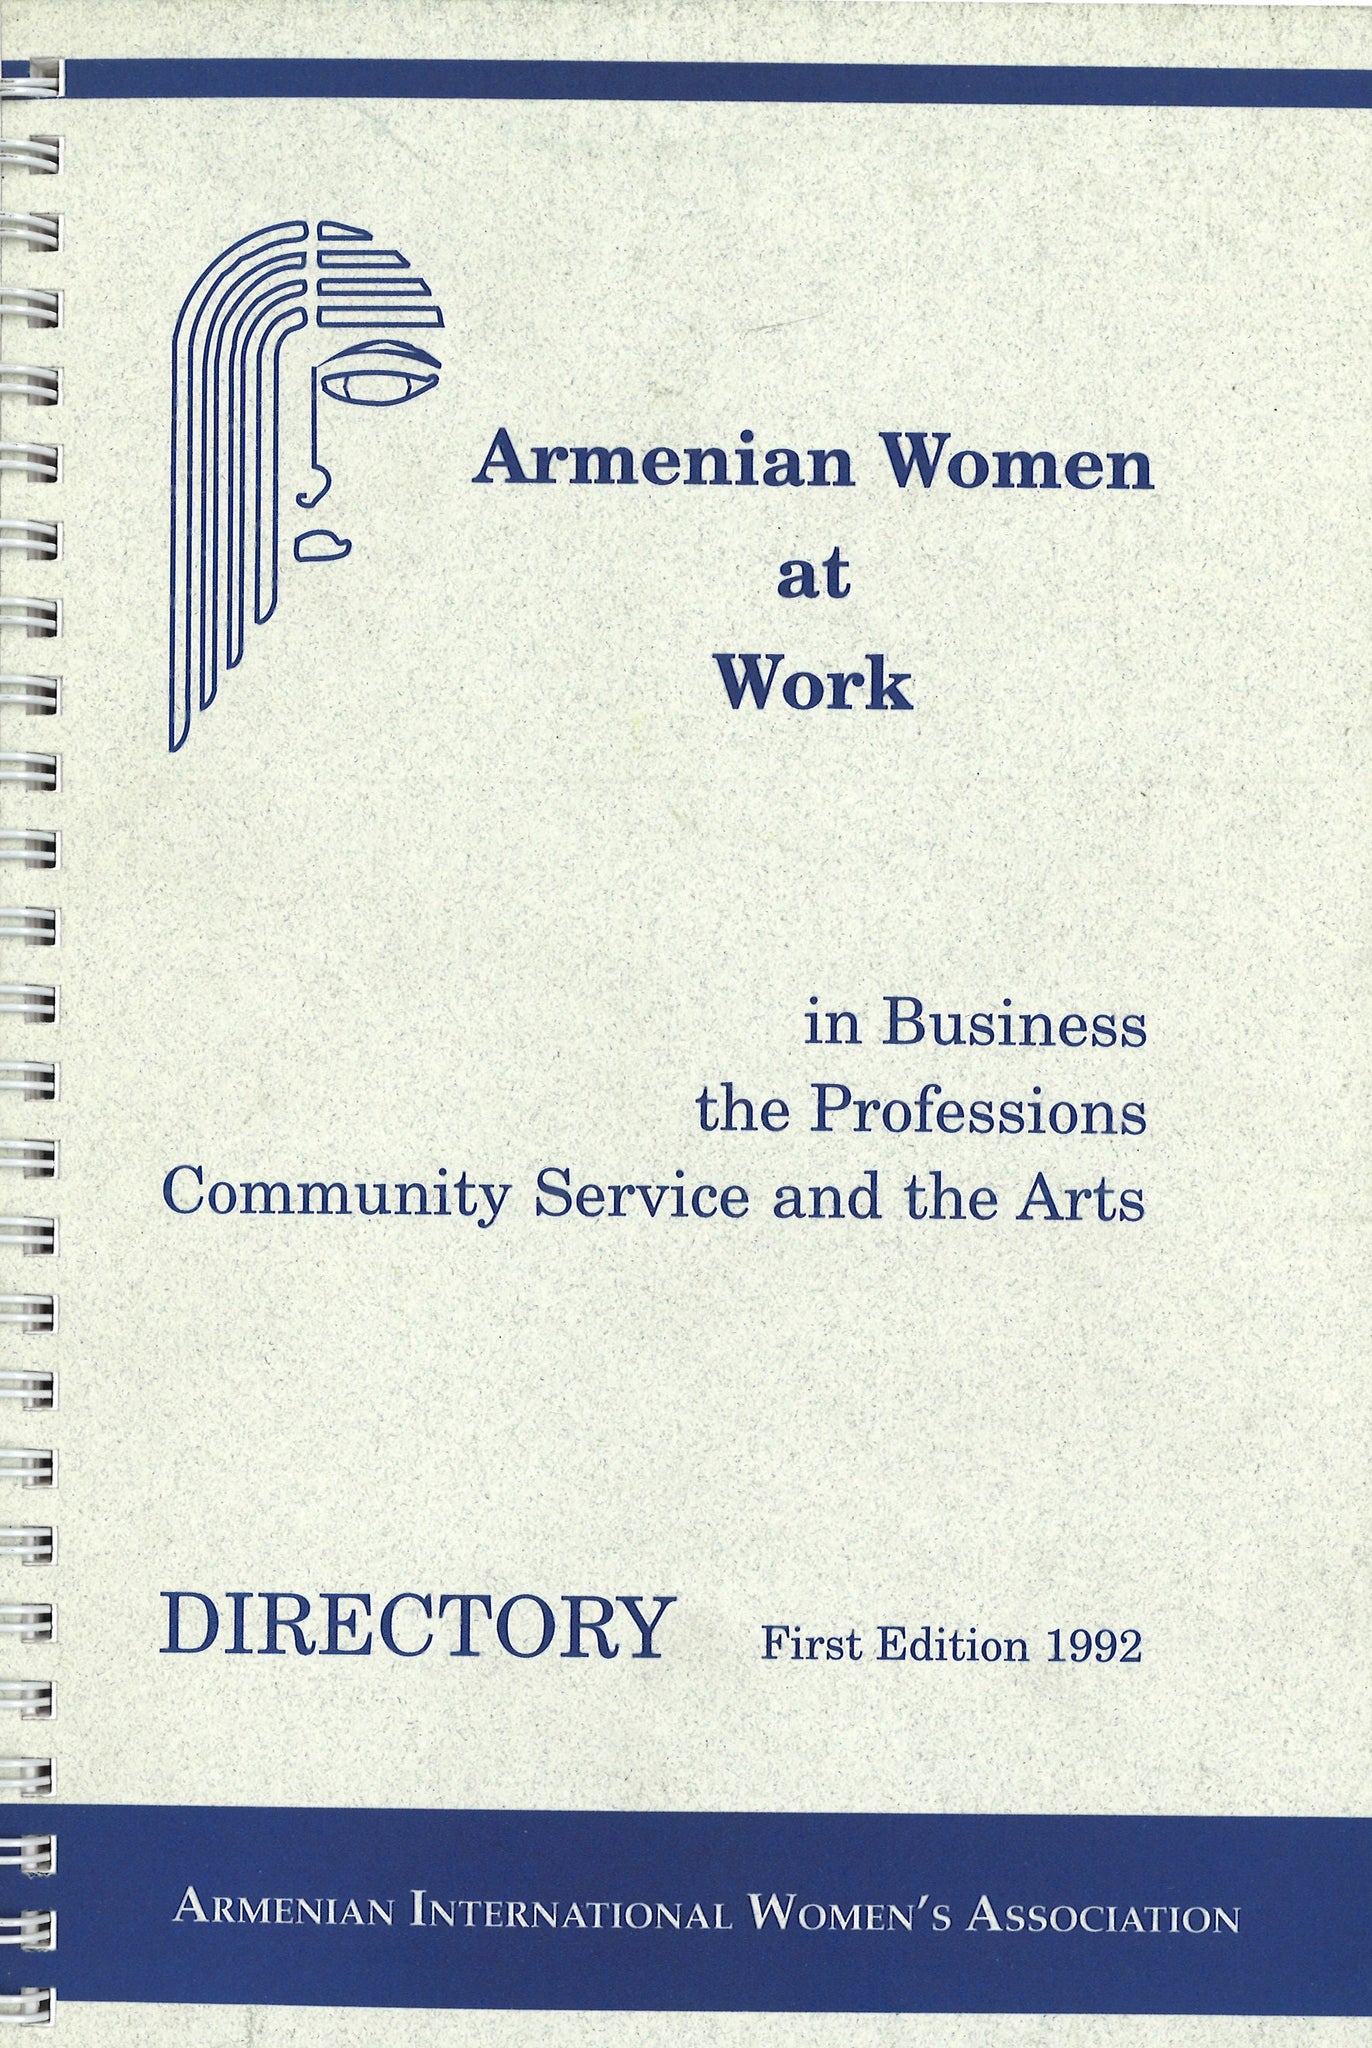 ARMENIAN WOMEN AT WORK: In Business the Professions Community Service and the Arts